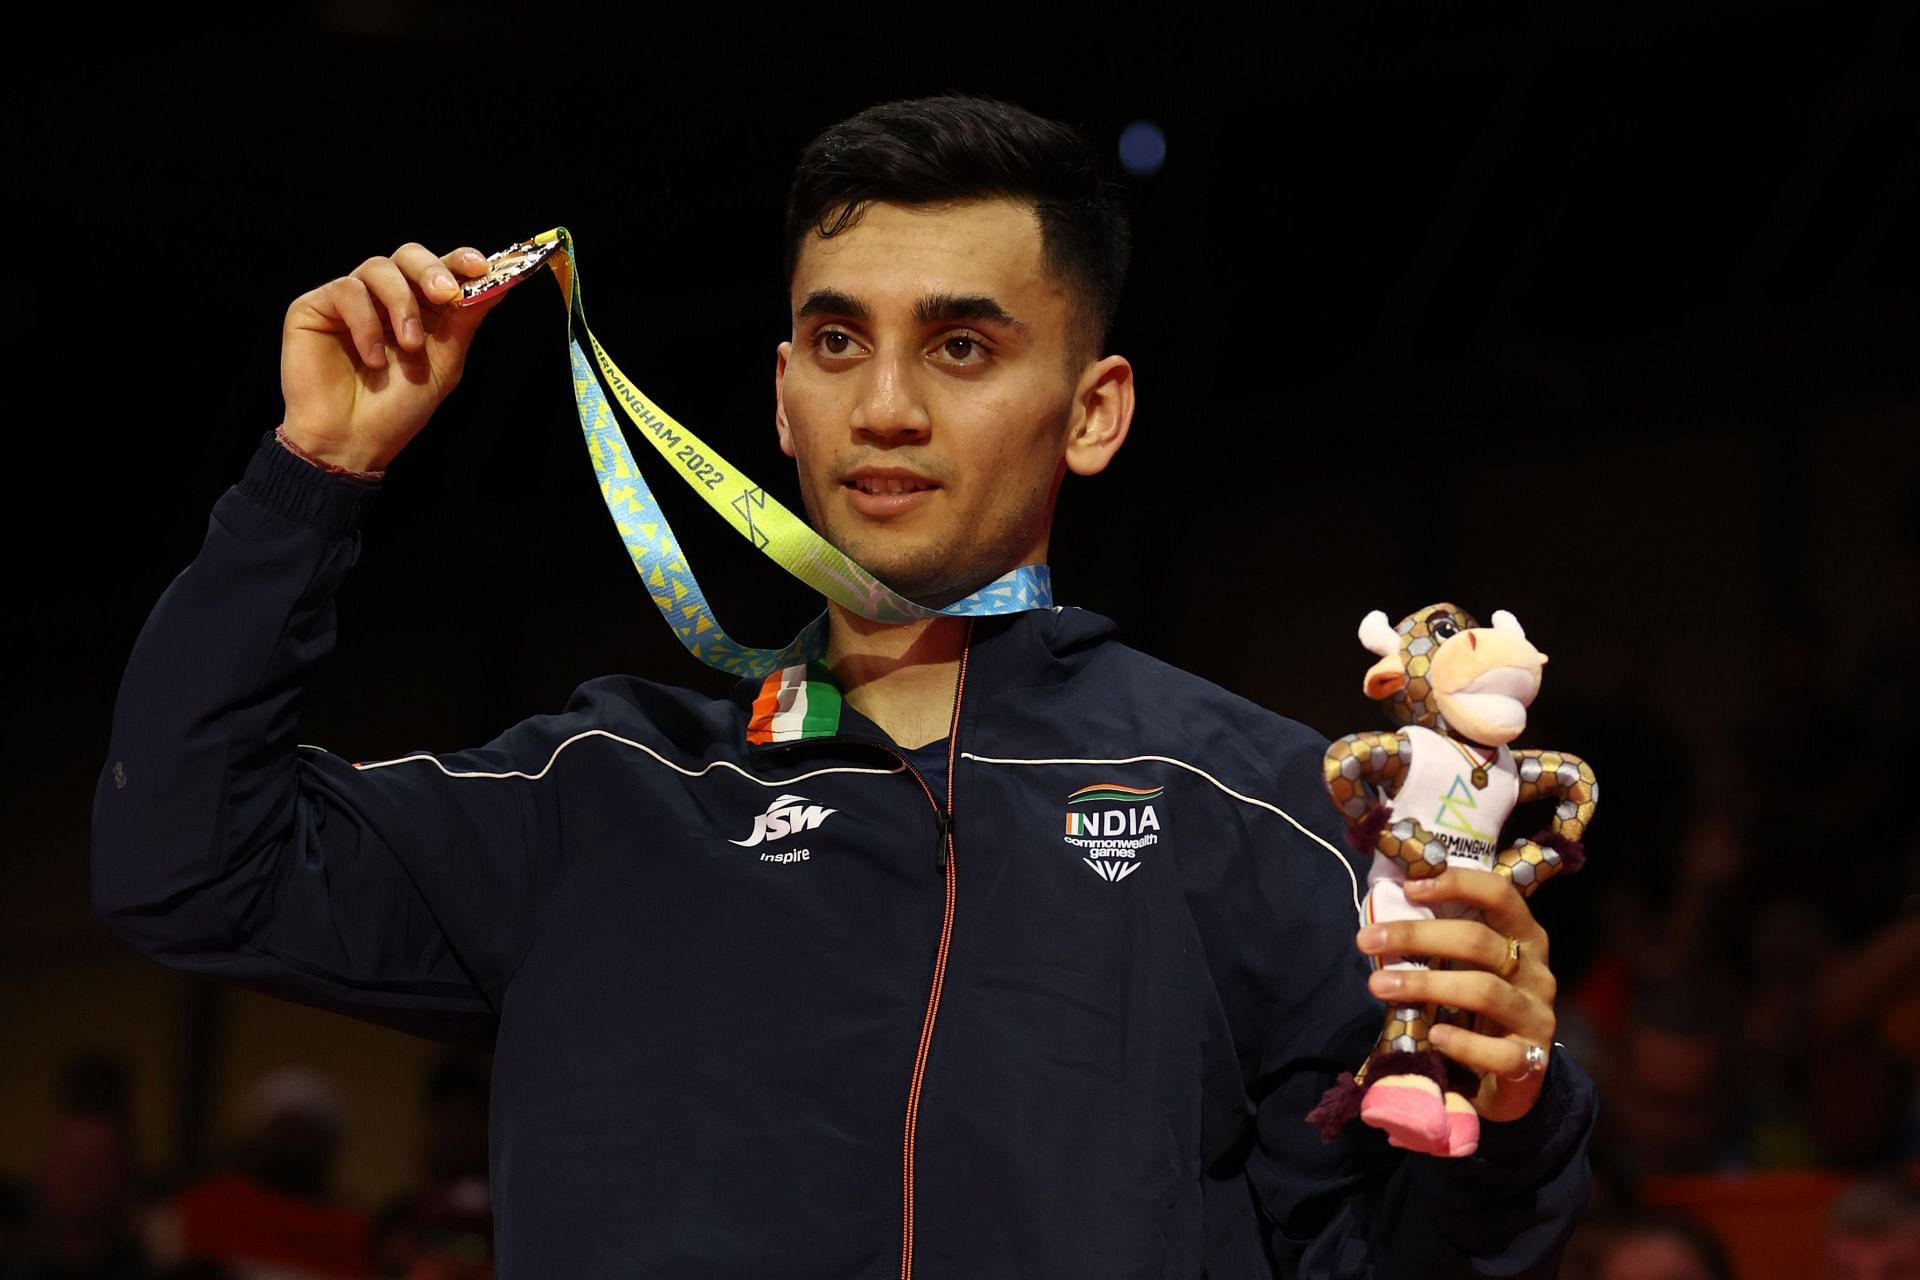 Sen flaunts his Commonwealth Games 2022 gold medal in Birmingham (Image: Getty)